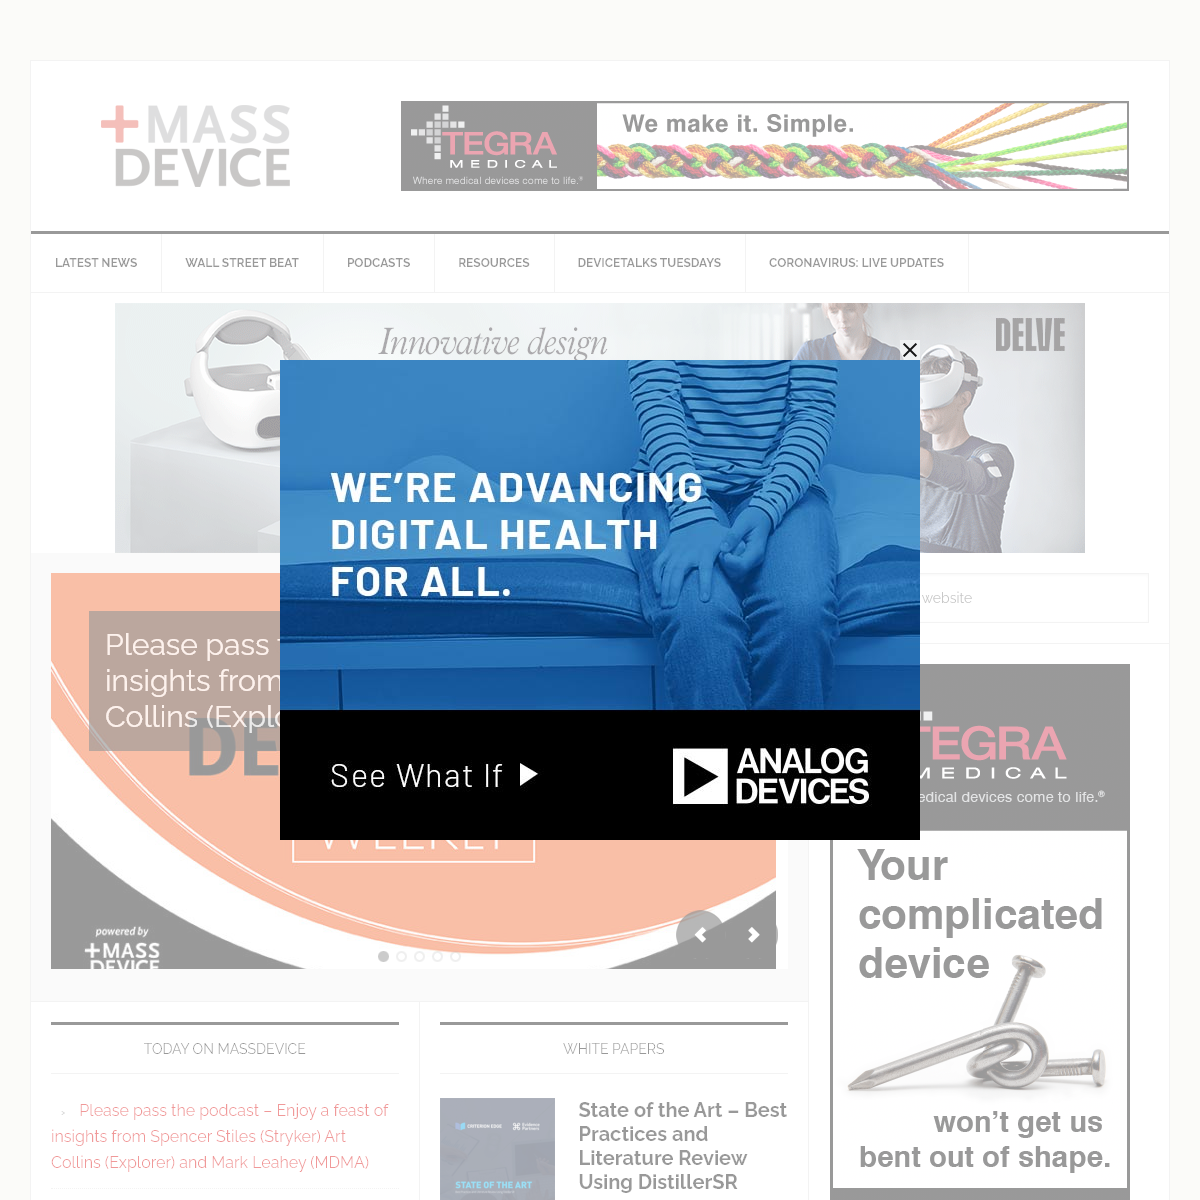 MassDevice - The Medical Device Business Journal â€” Medical Device News & Articles - MassDevice